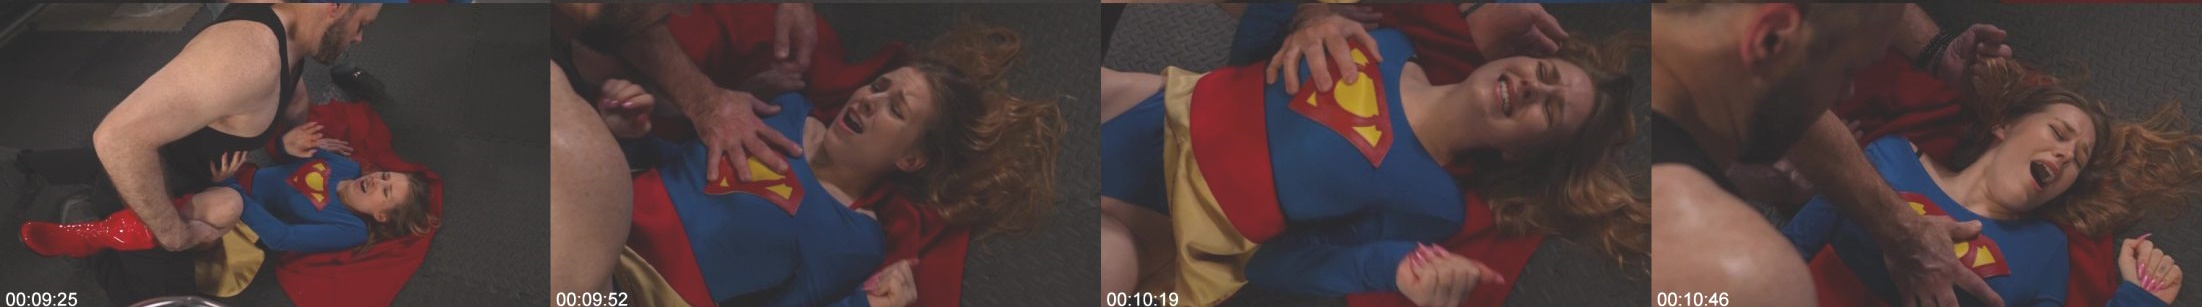 How to Destroy a Superheroine Trucker's Trap Edition with UltraGirl-HeroicFemmes Banner